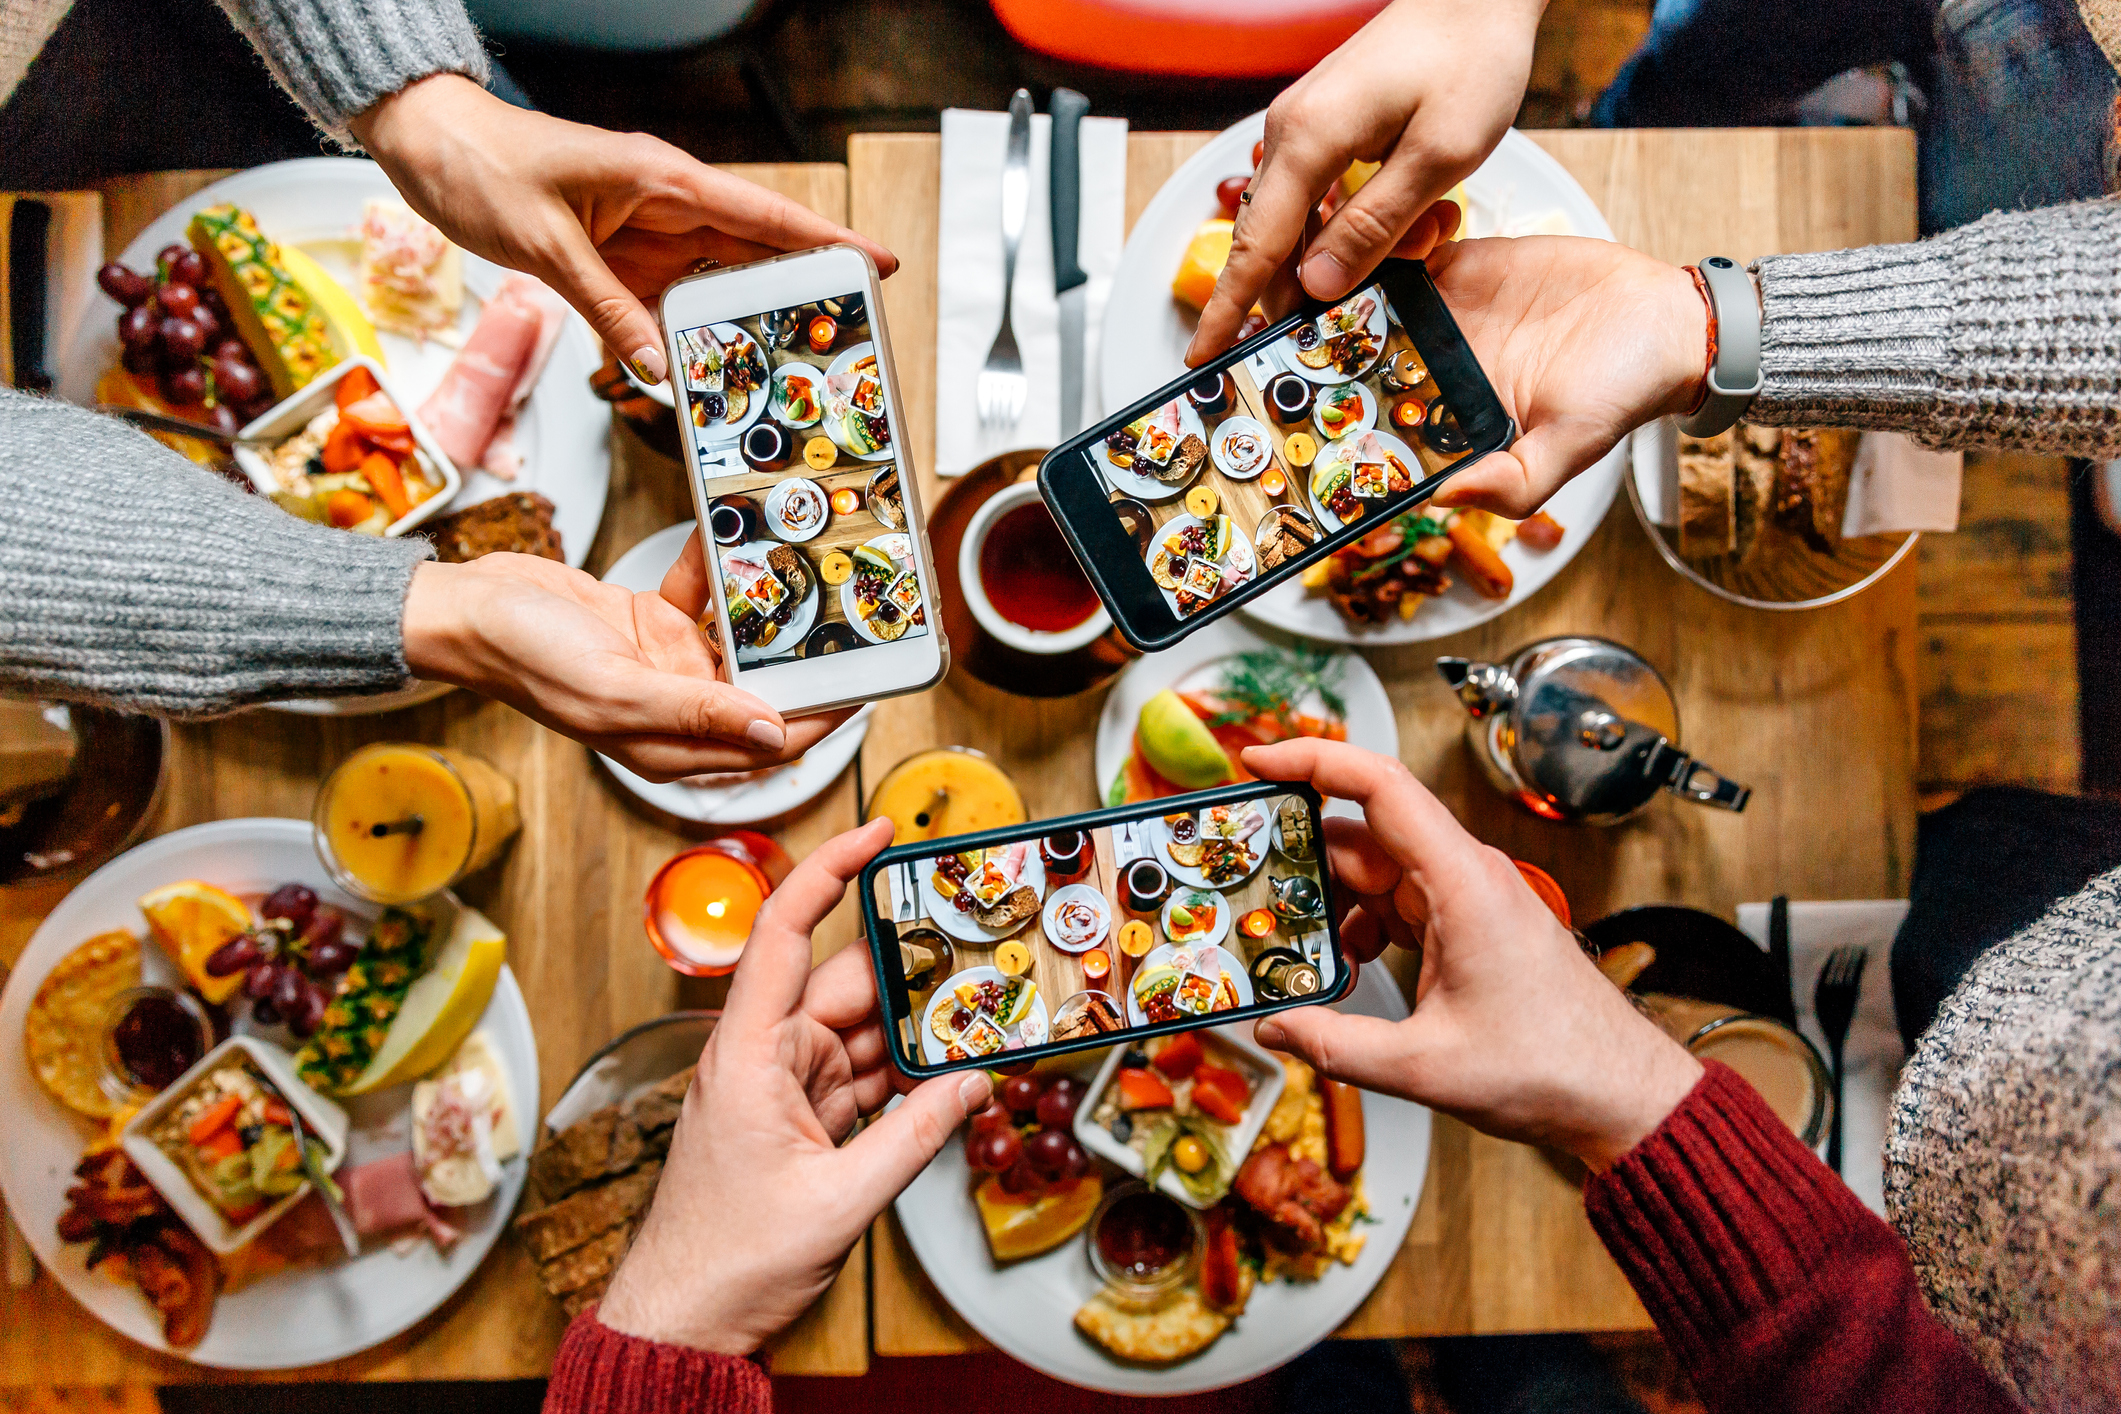 Four hands holding smartphones above a table filled with various dishes, taking photos of the food